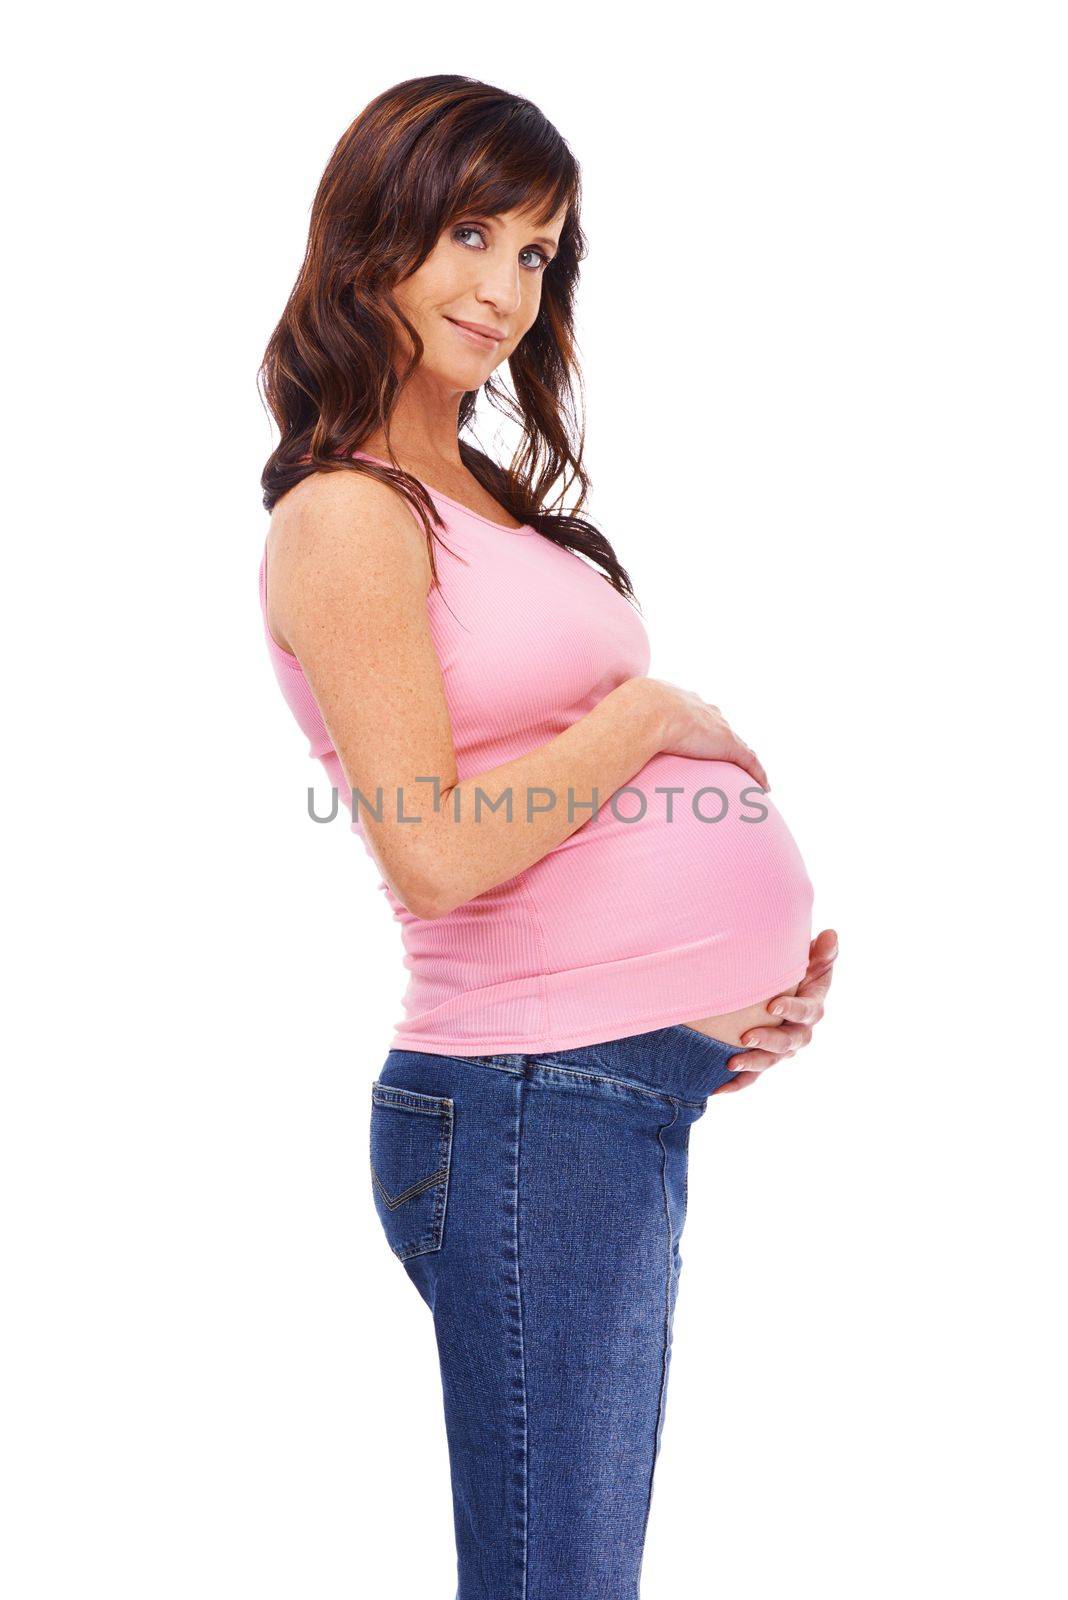 Considering her childs future. A young pregnant woman standing against a white background. by YuriArcurs